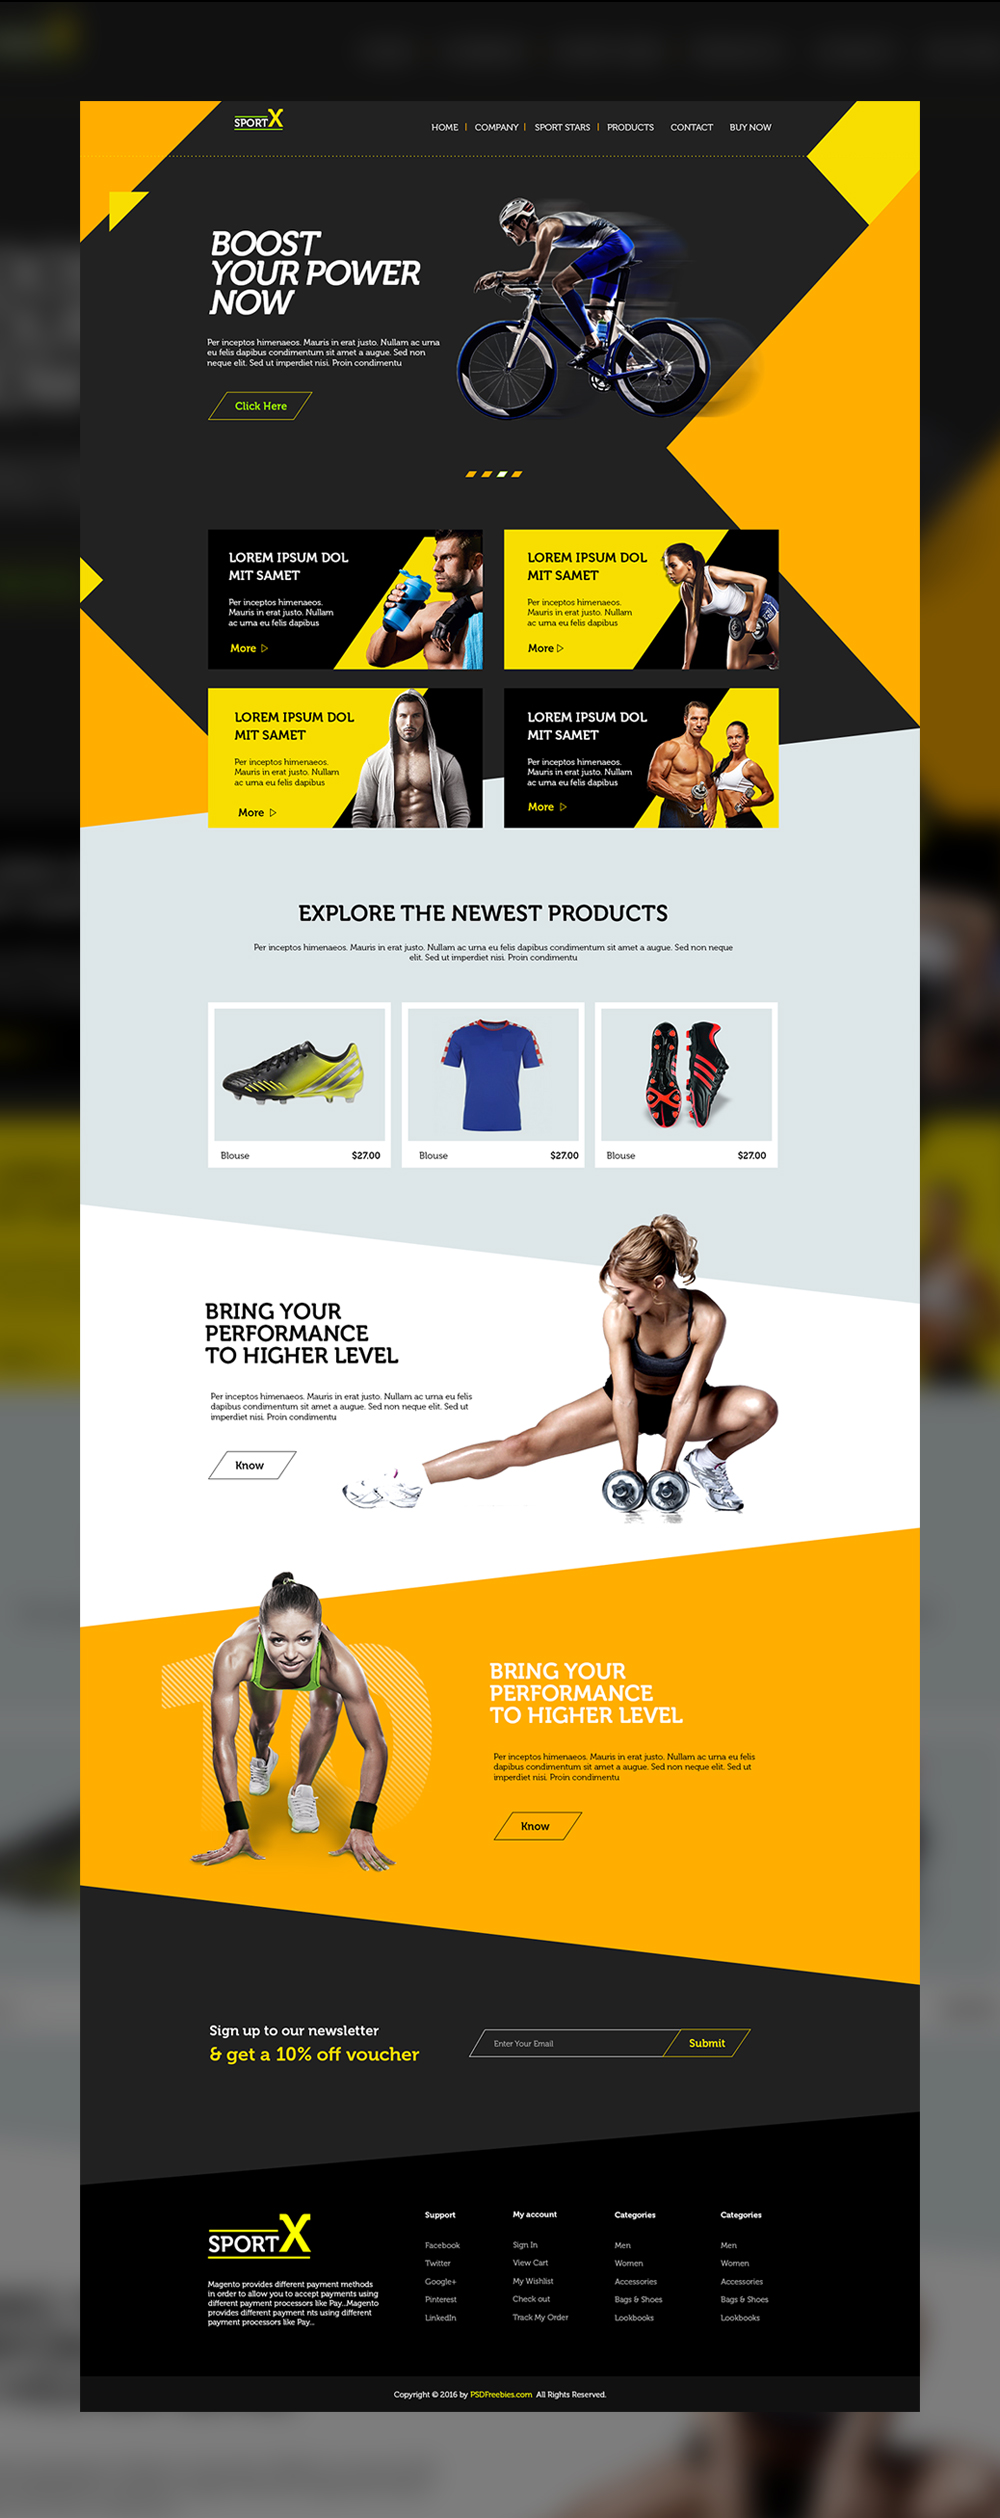 Download Sports Shop Website Multipurpose Free Psd Template Psdfreebies Com Yellowimages Mockups